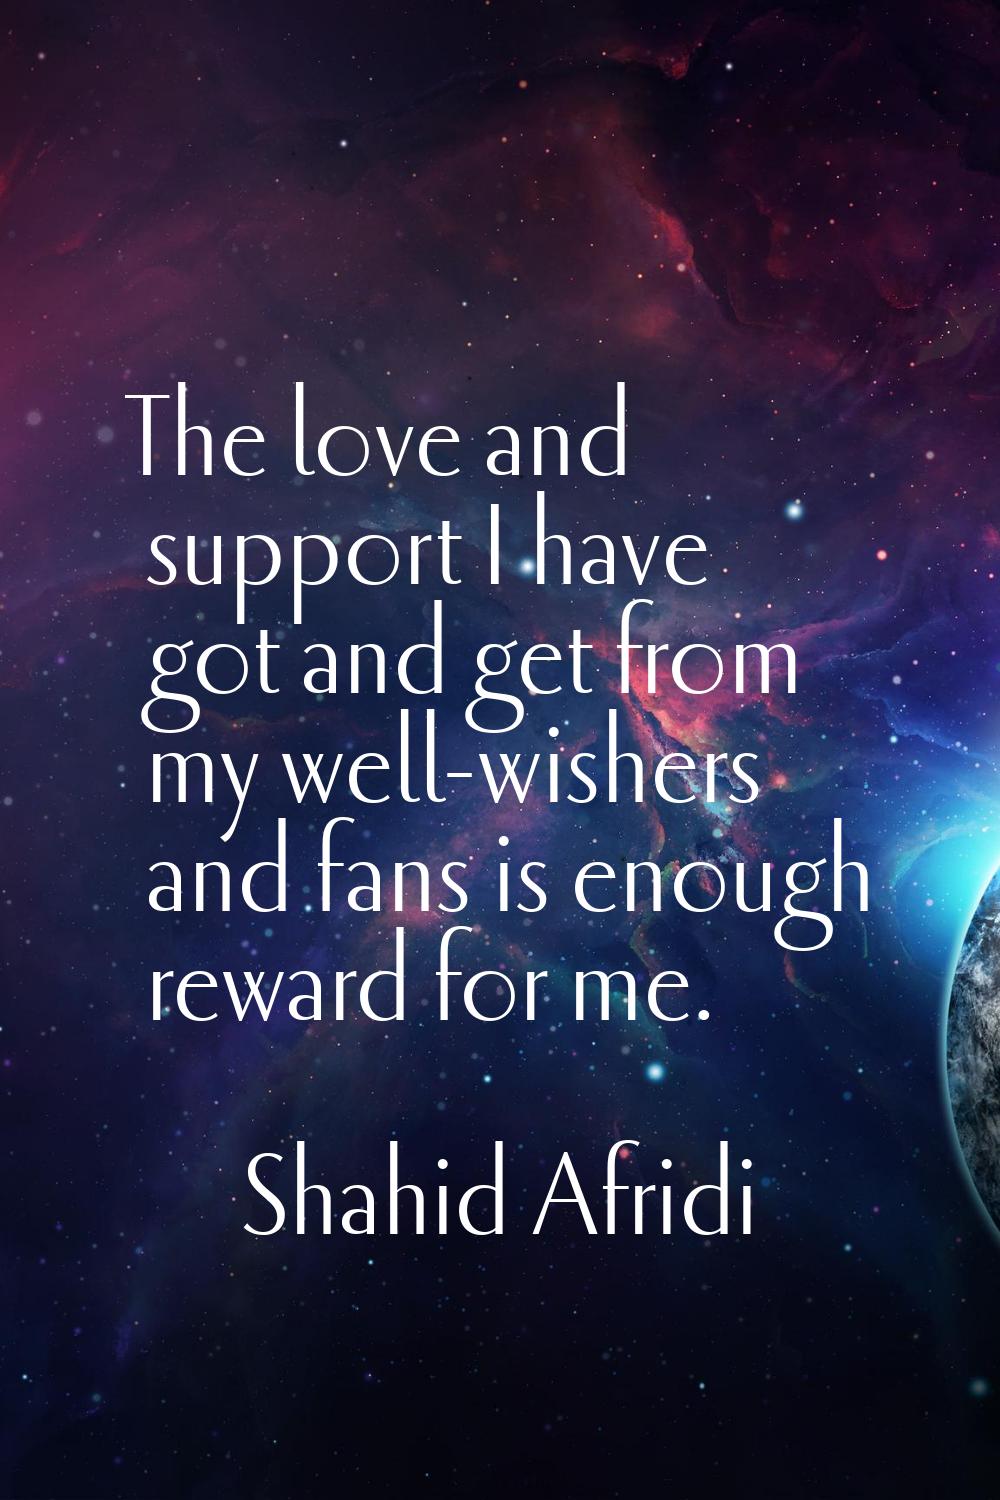 The love and support I have got and get from my well-wishers and fans is enough reward for me.